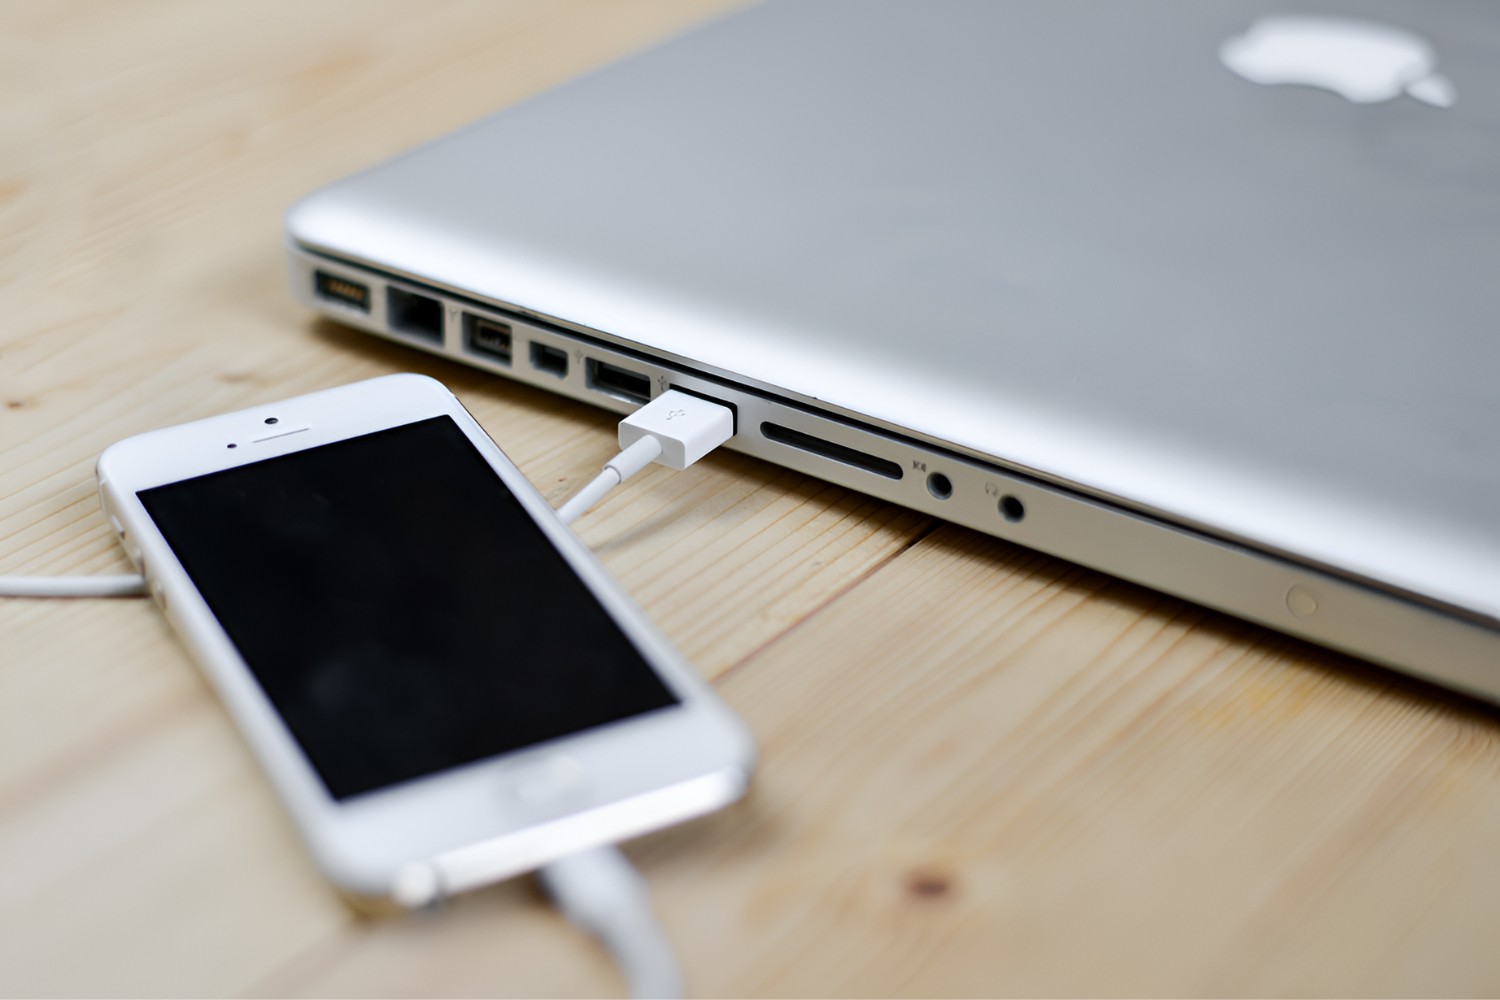 USB Connection With IPhone Hotspot: Quick Guide